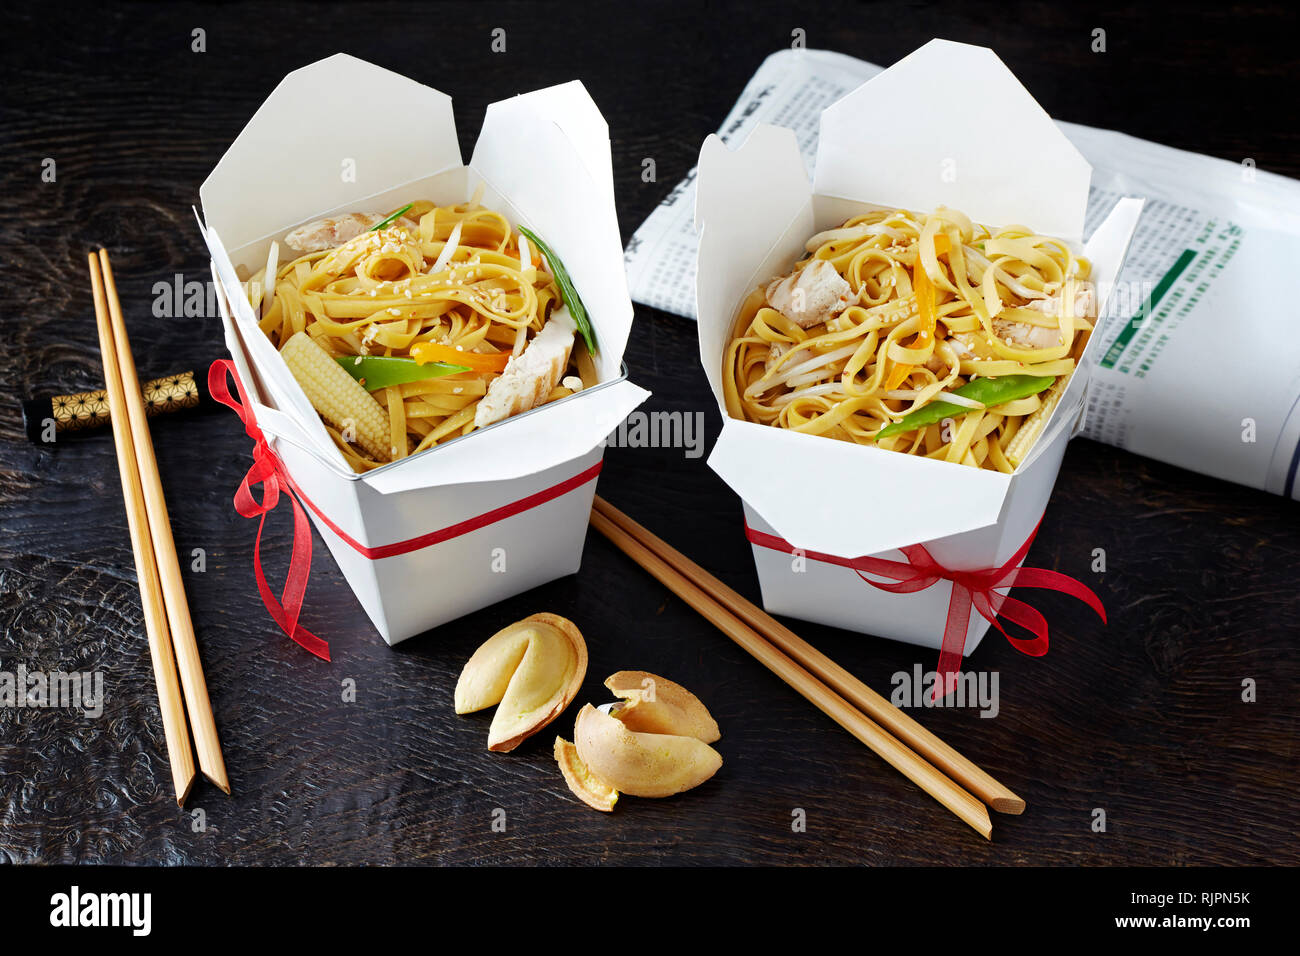 Still life with chinese noodles in takeaway boxes, asian takeaway food Stock Photo